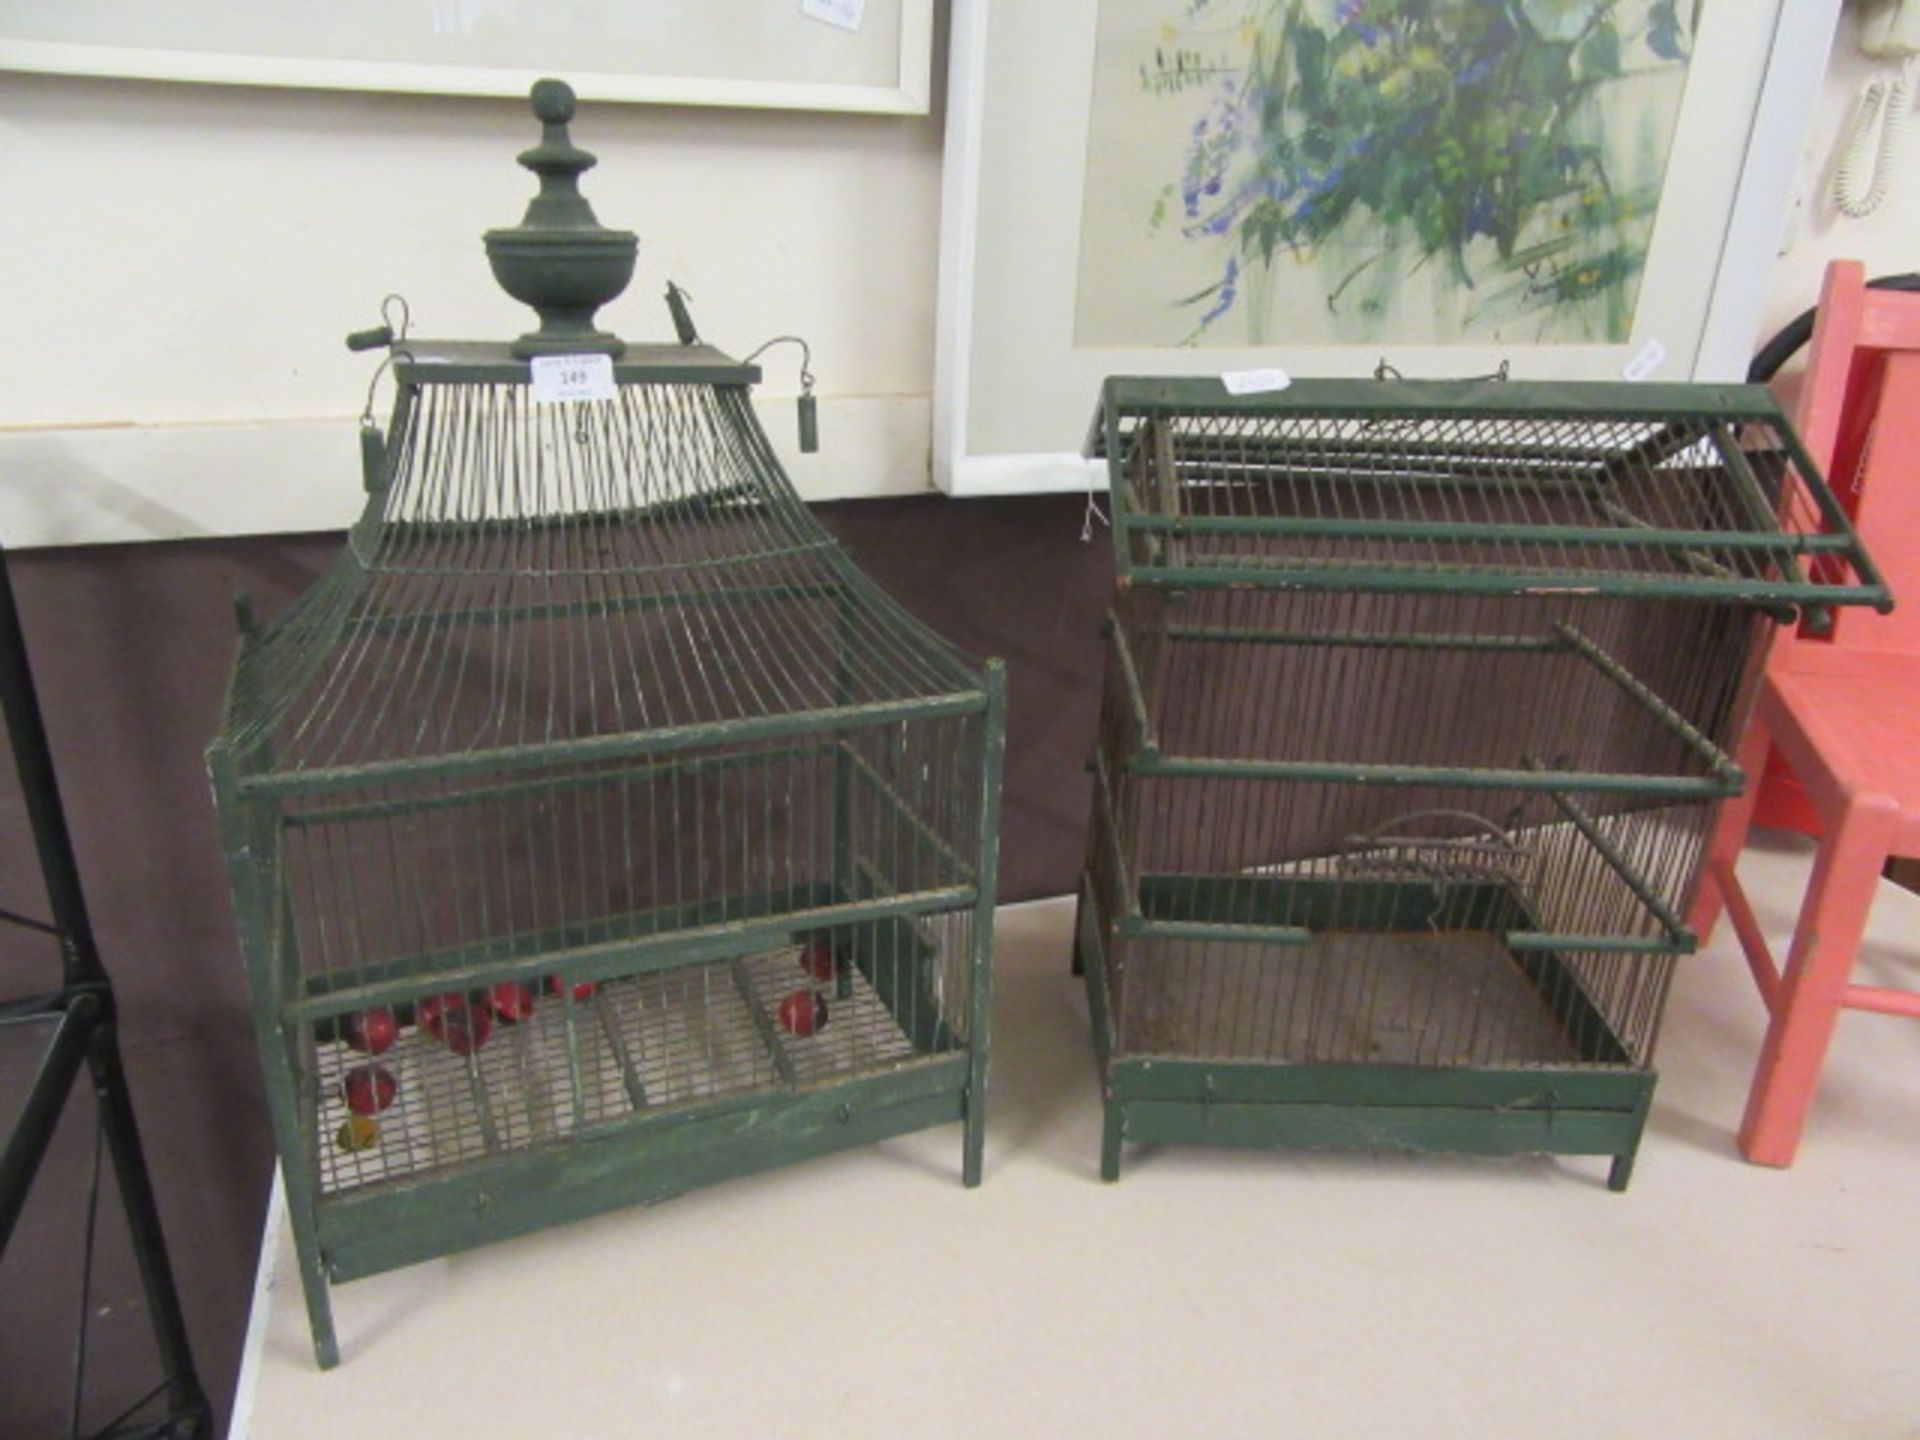 A pair of ornamental bird cages